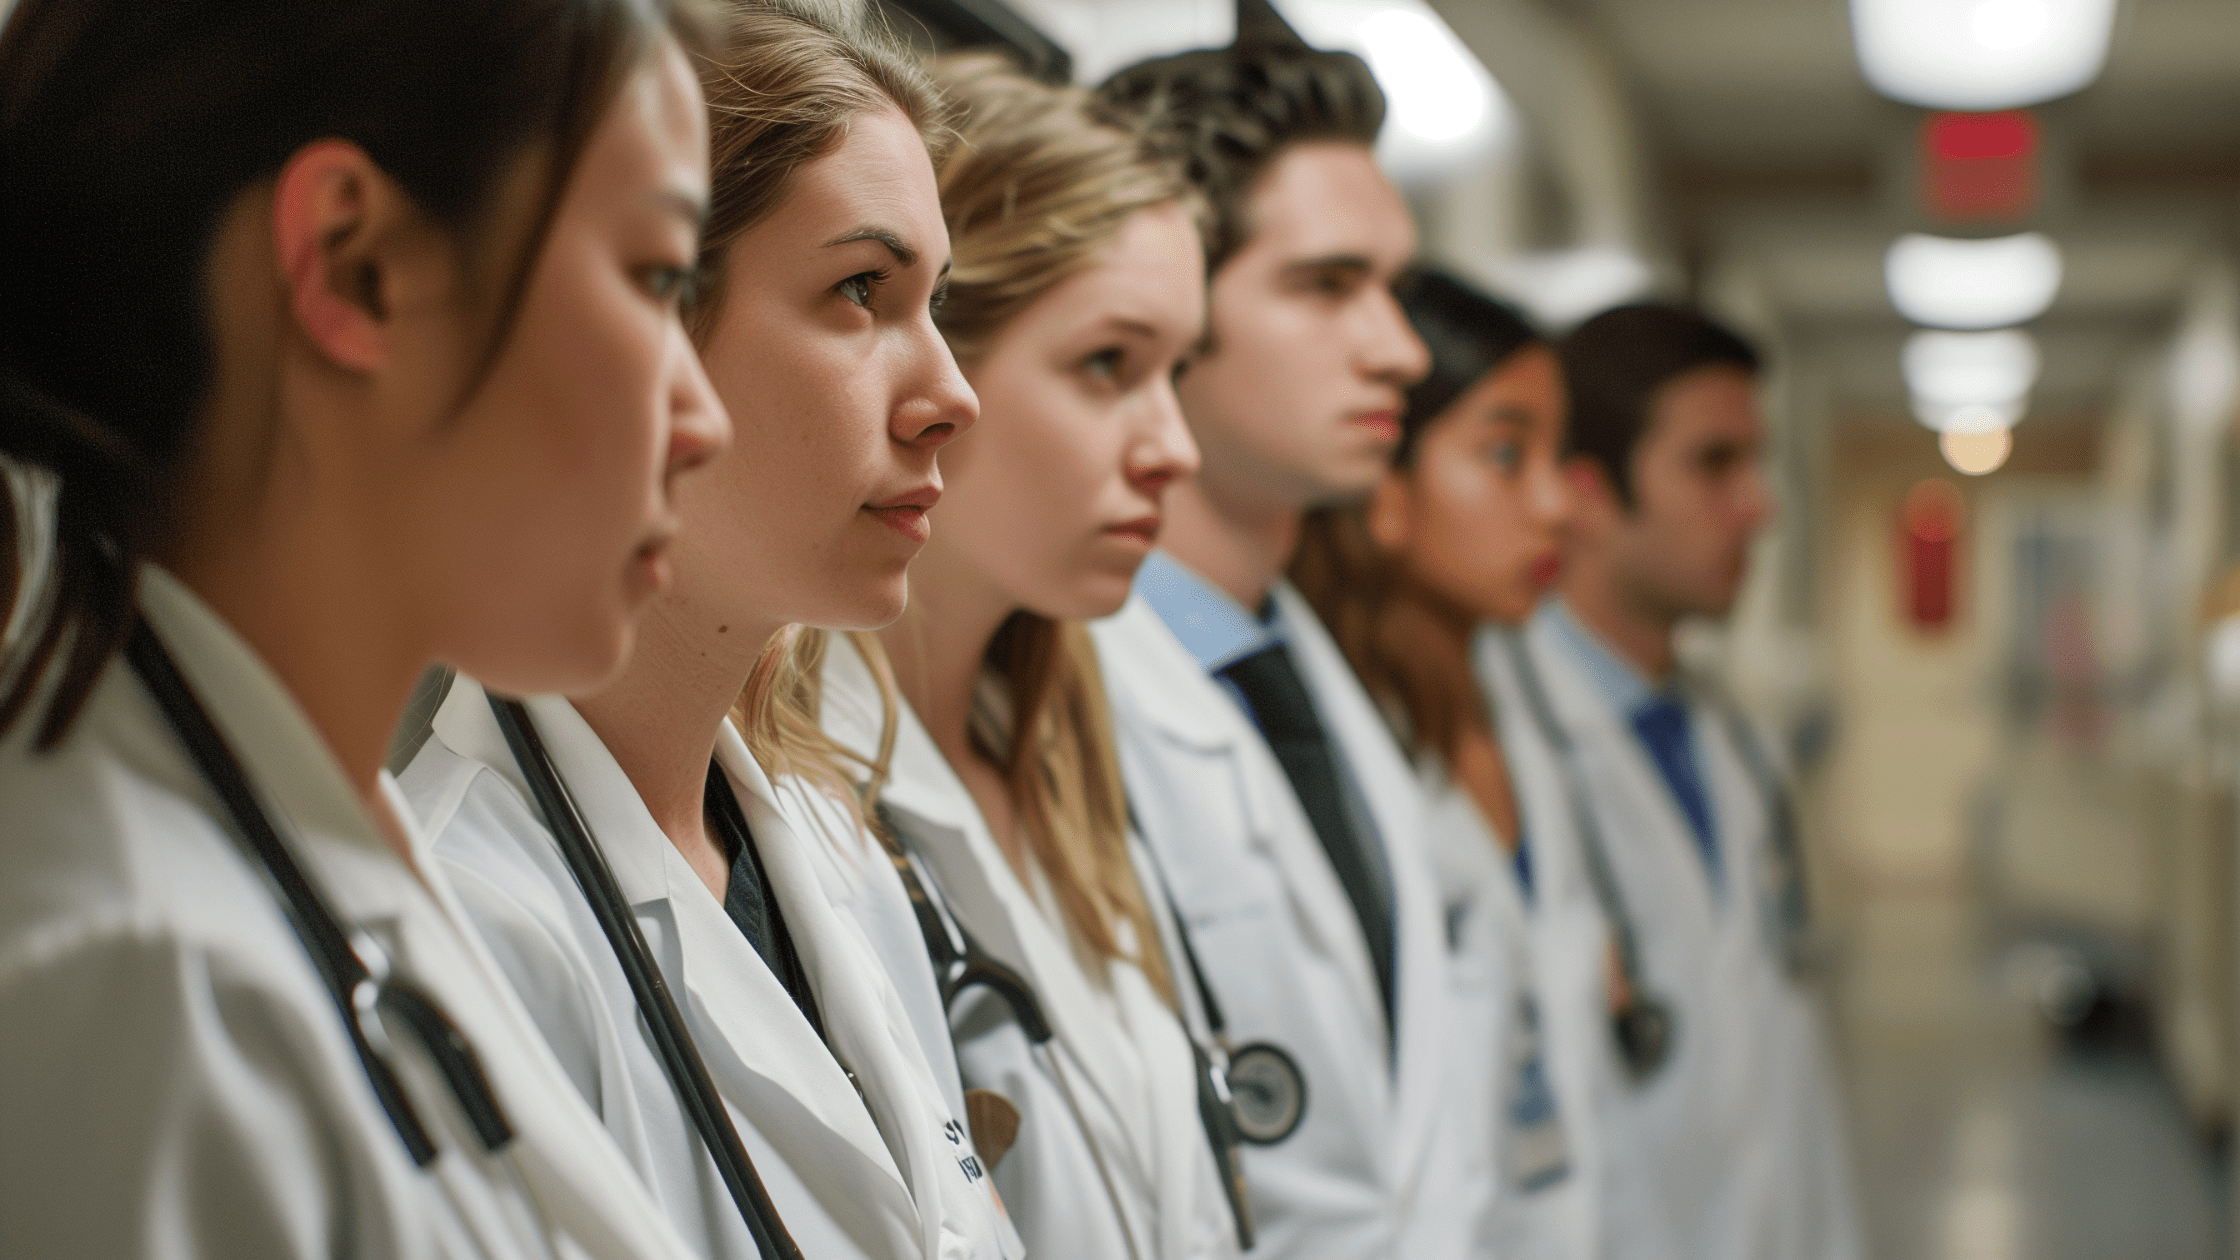 A group of medical school students on their OB/Gyn clinical rotations.